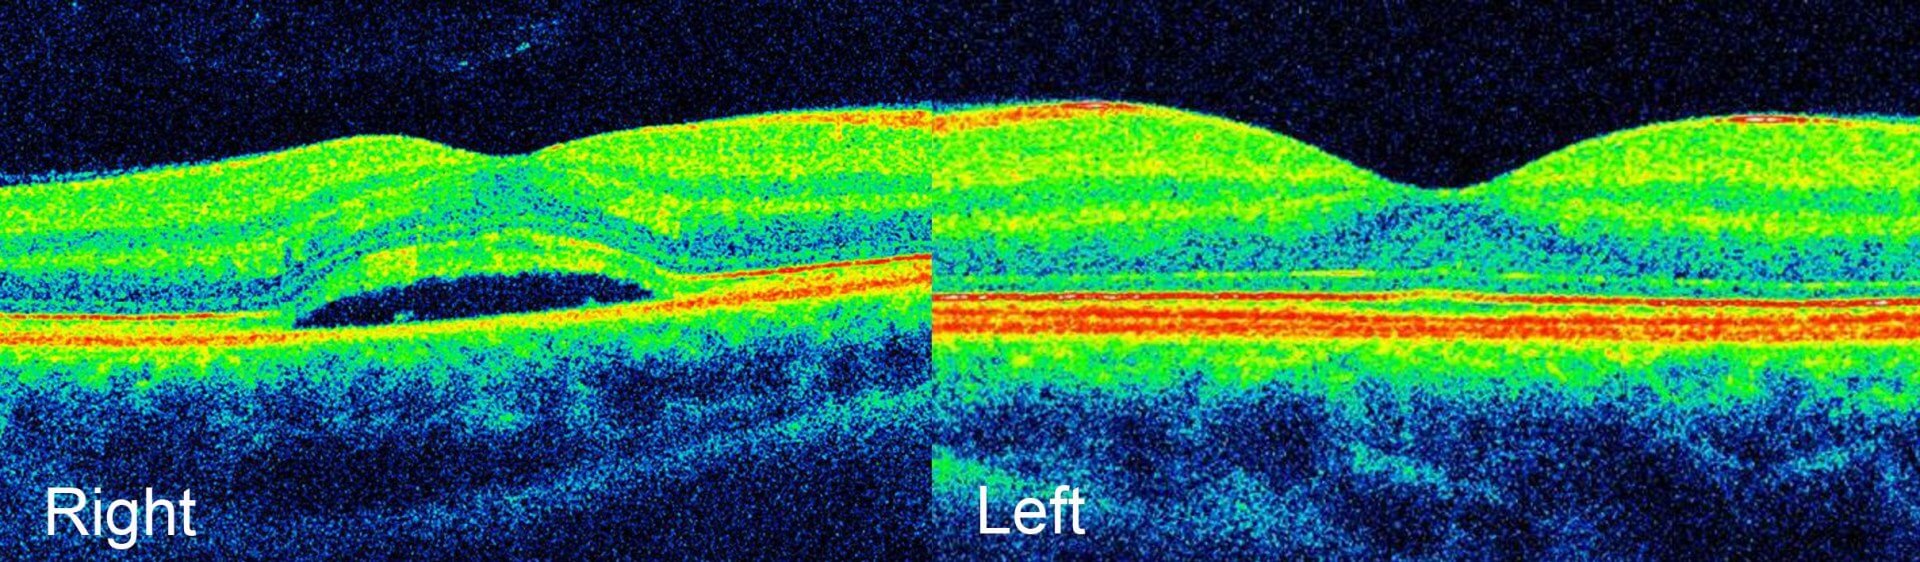 Right and left optical coherence tomography scans. There is subretinal fluid at the right macula.